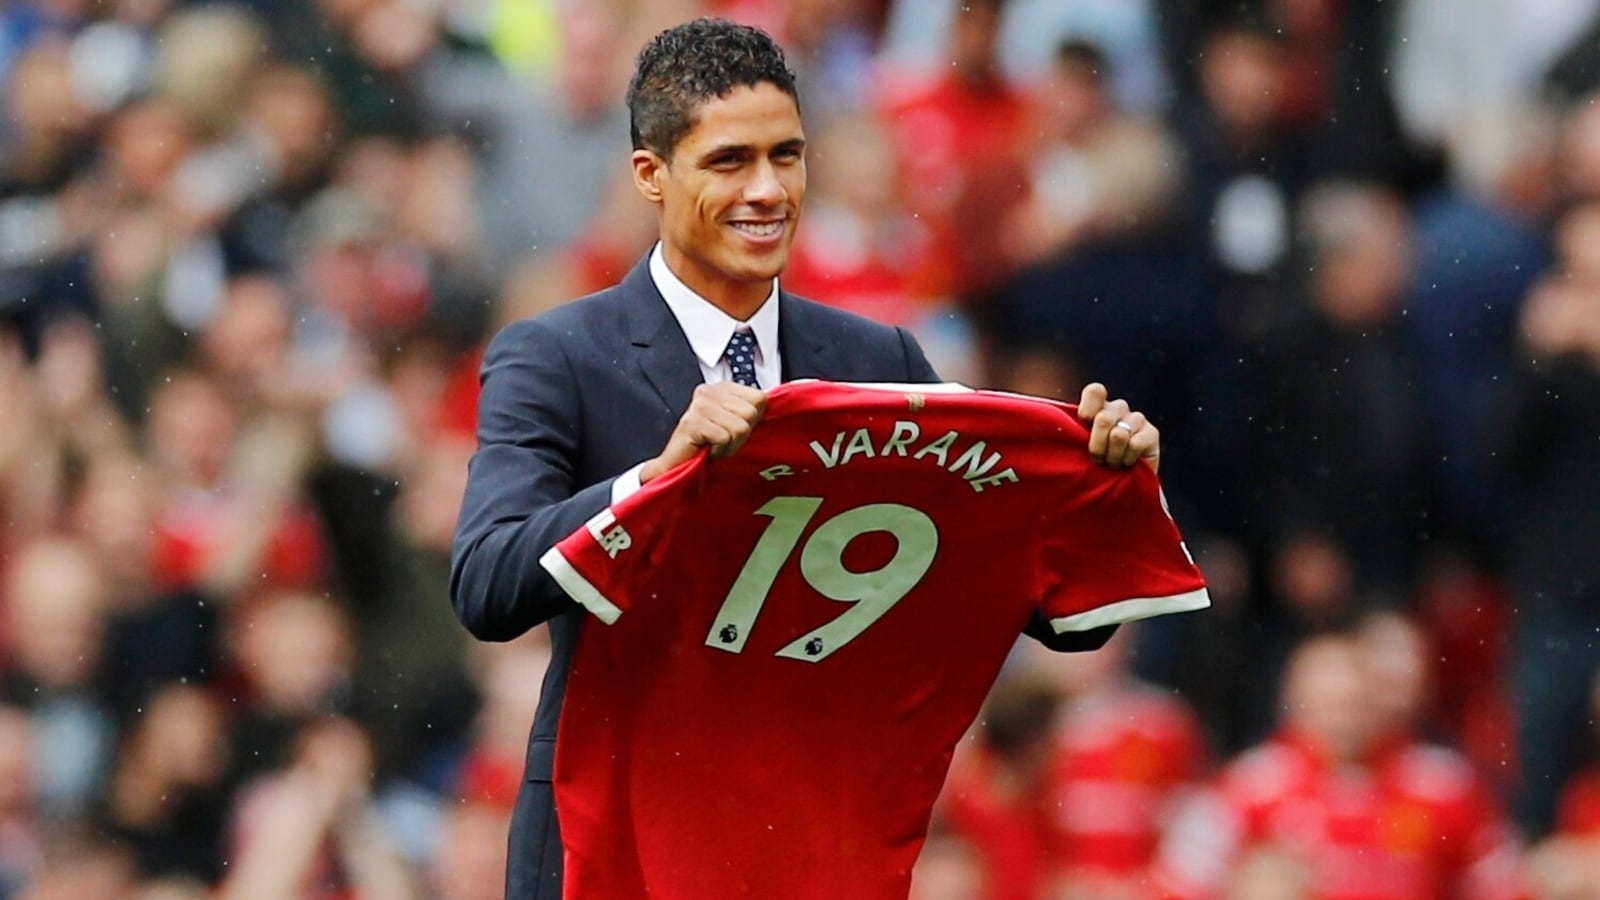 Man United completes signing of Varane from Real Madrid